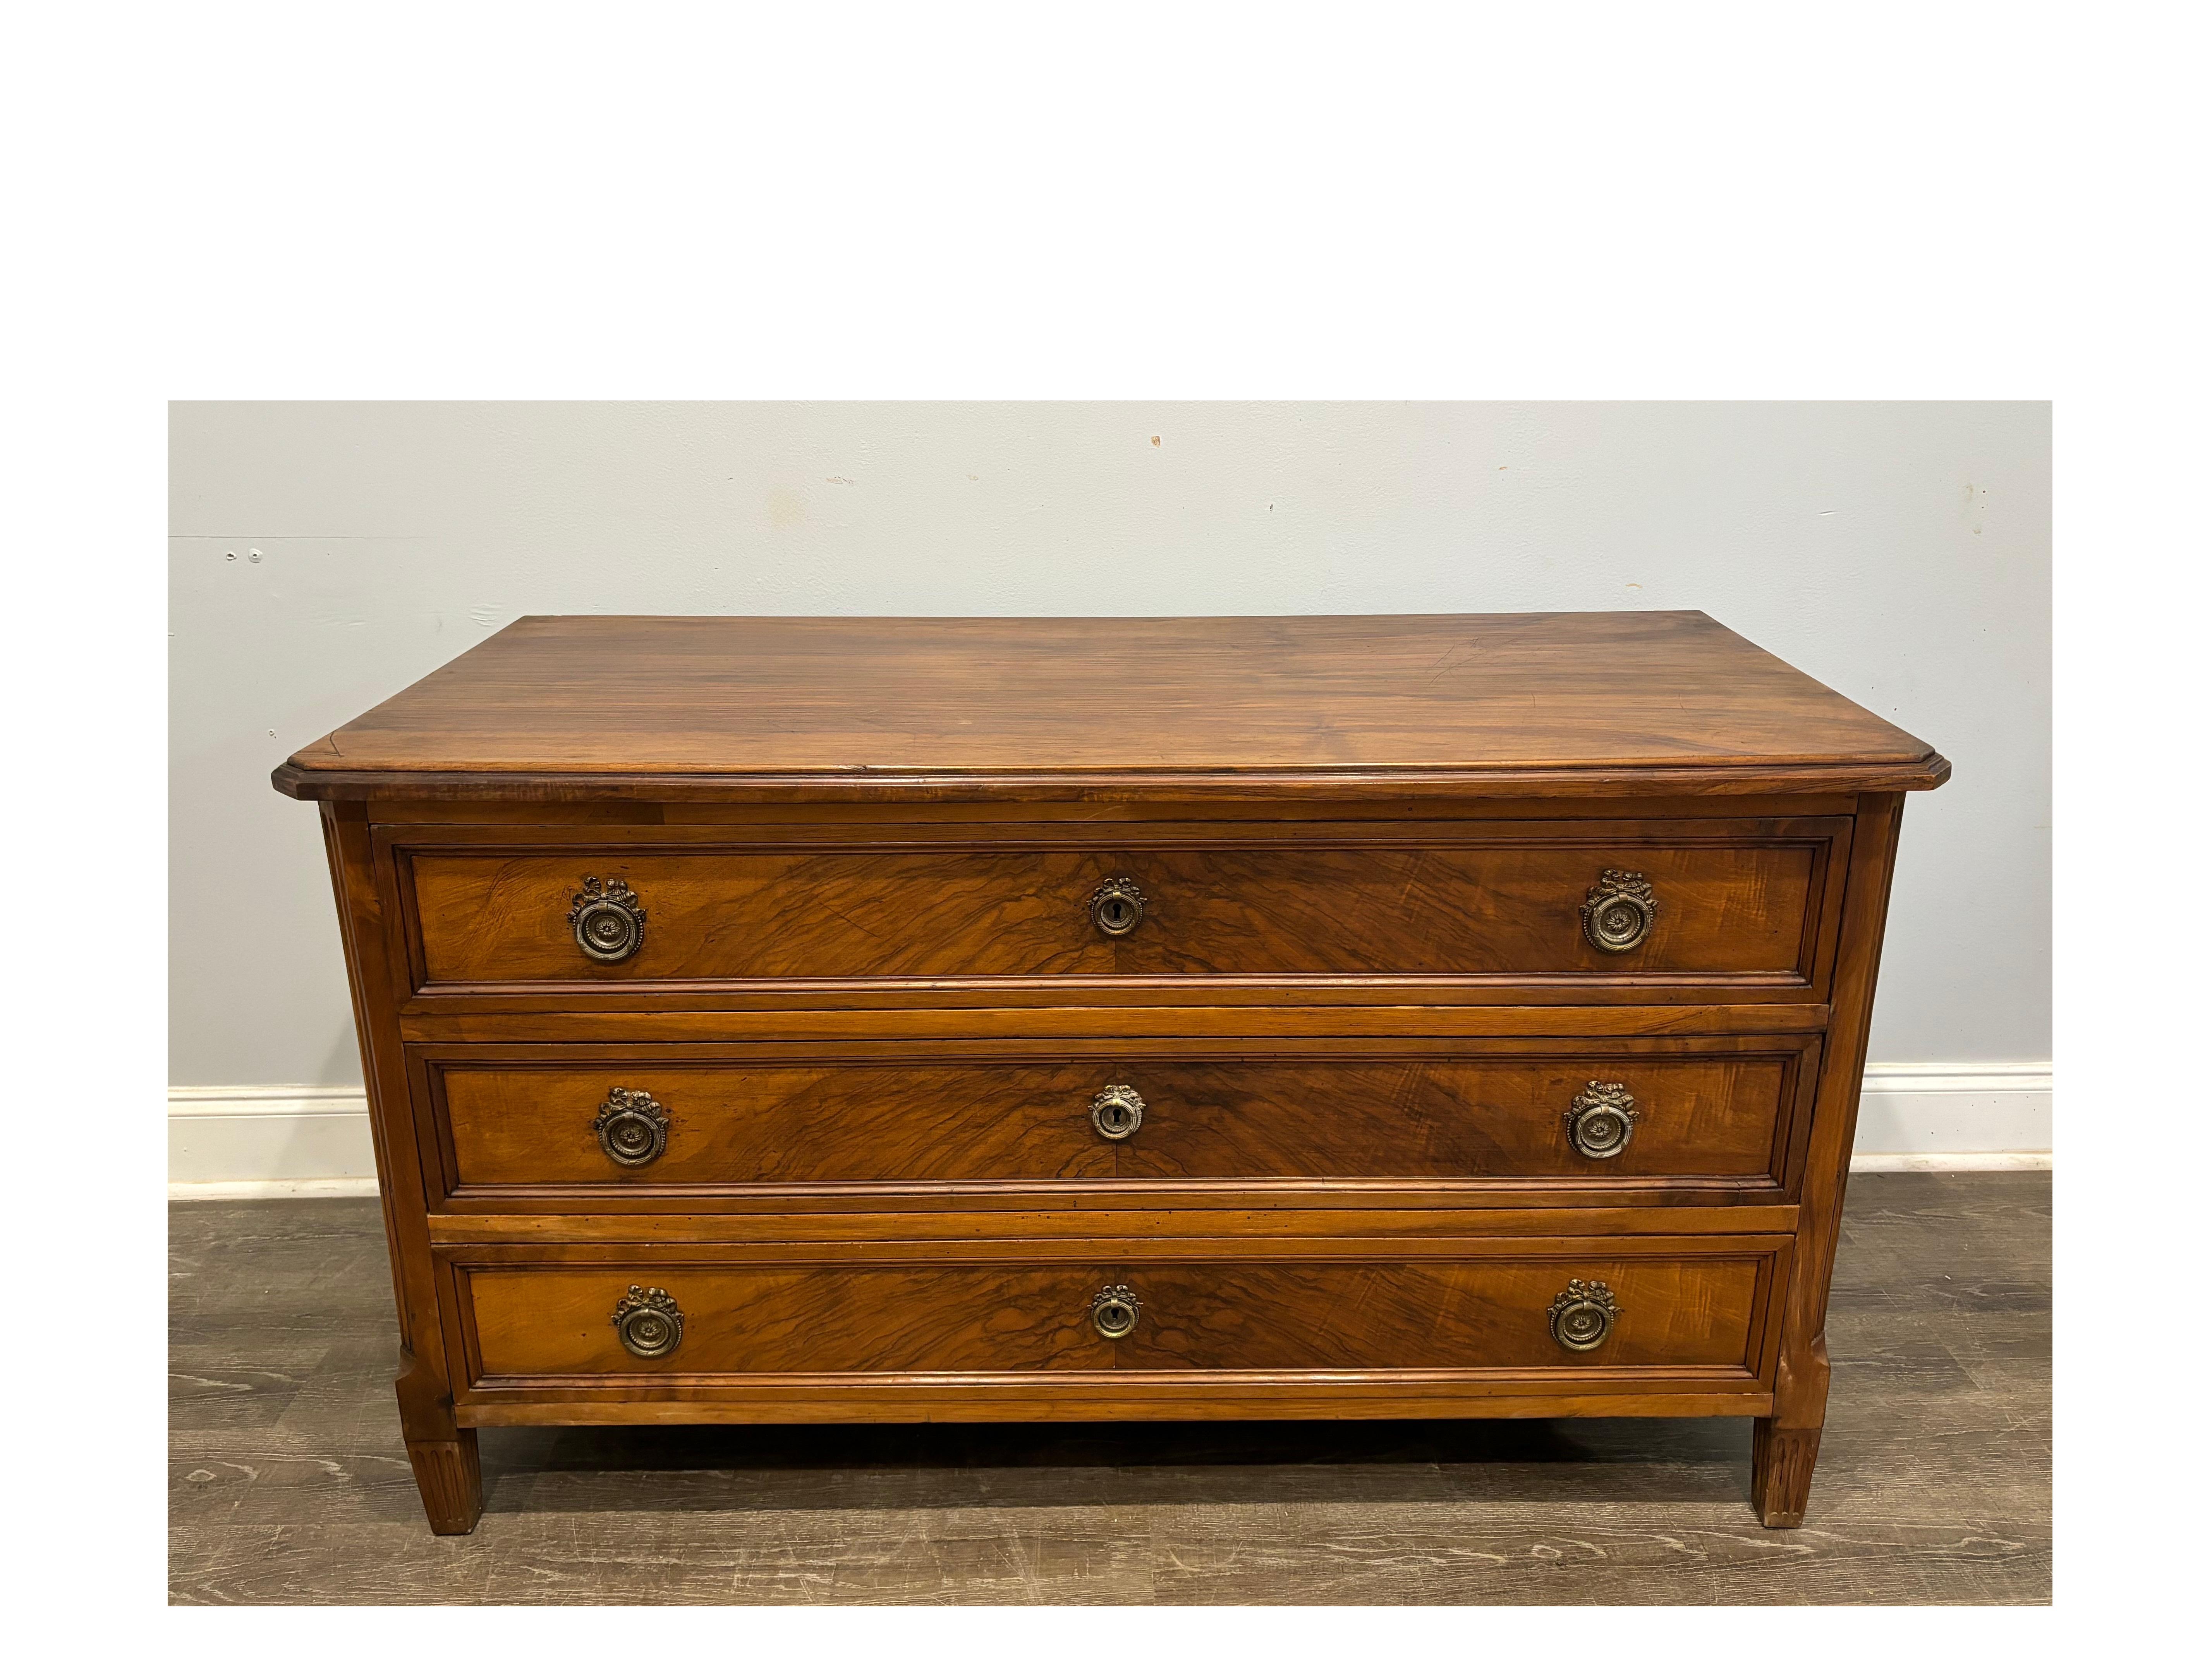 This 18th century commode is made of a beautiful flamed walnut, with 3 drawers.